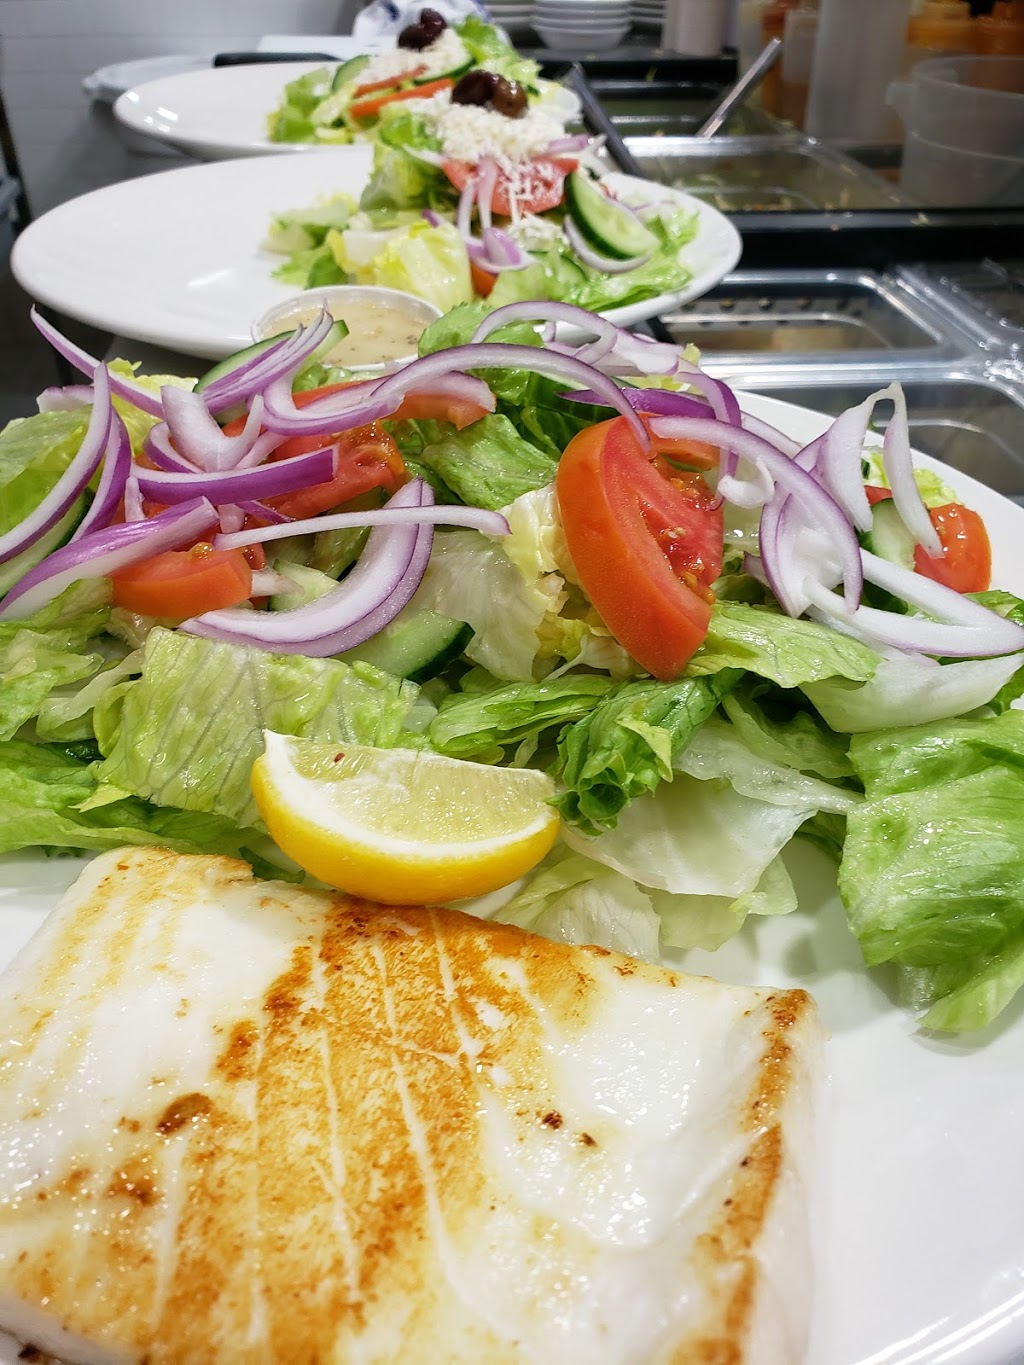 Halibut House Fish & Chips Thornhill | 11 Disera Dr #120, Thornhill, ON L4J 0A7, Canada | Phone: (905) 889-8484